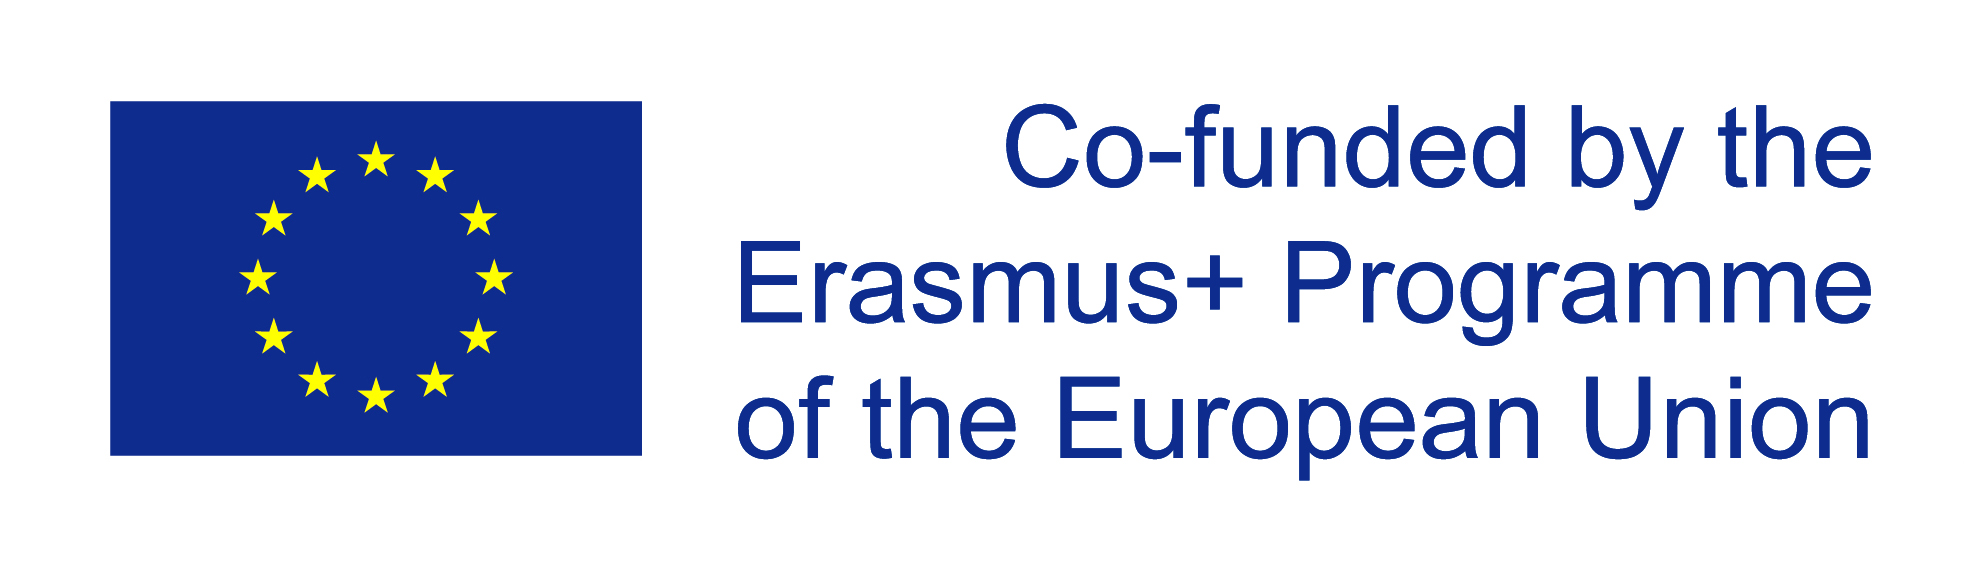 Co-funded by the Erasmus+ Programme of the EU